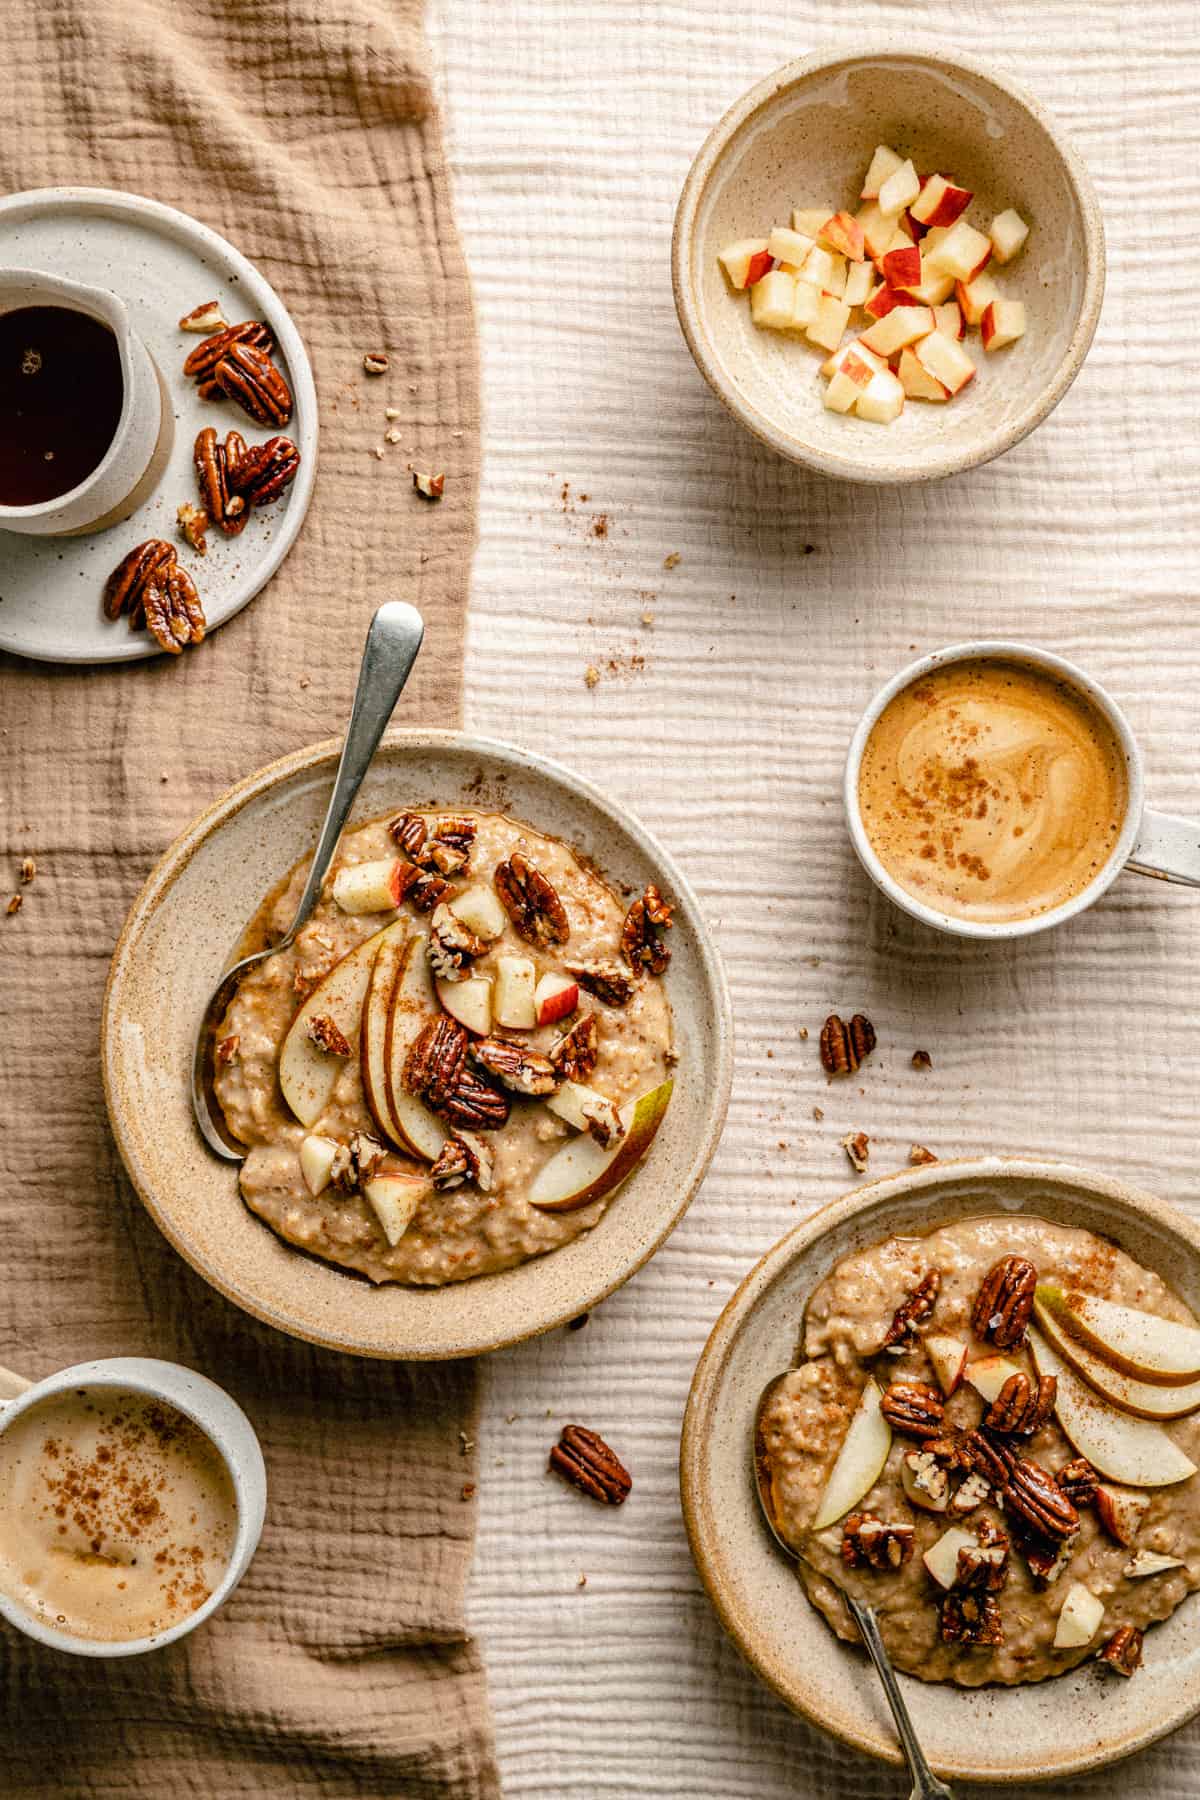 Two bowls of maple brown sugar oatmeal topped with nuts and fruit with coffee and more syrup in a jug nearby.